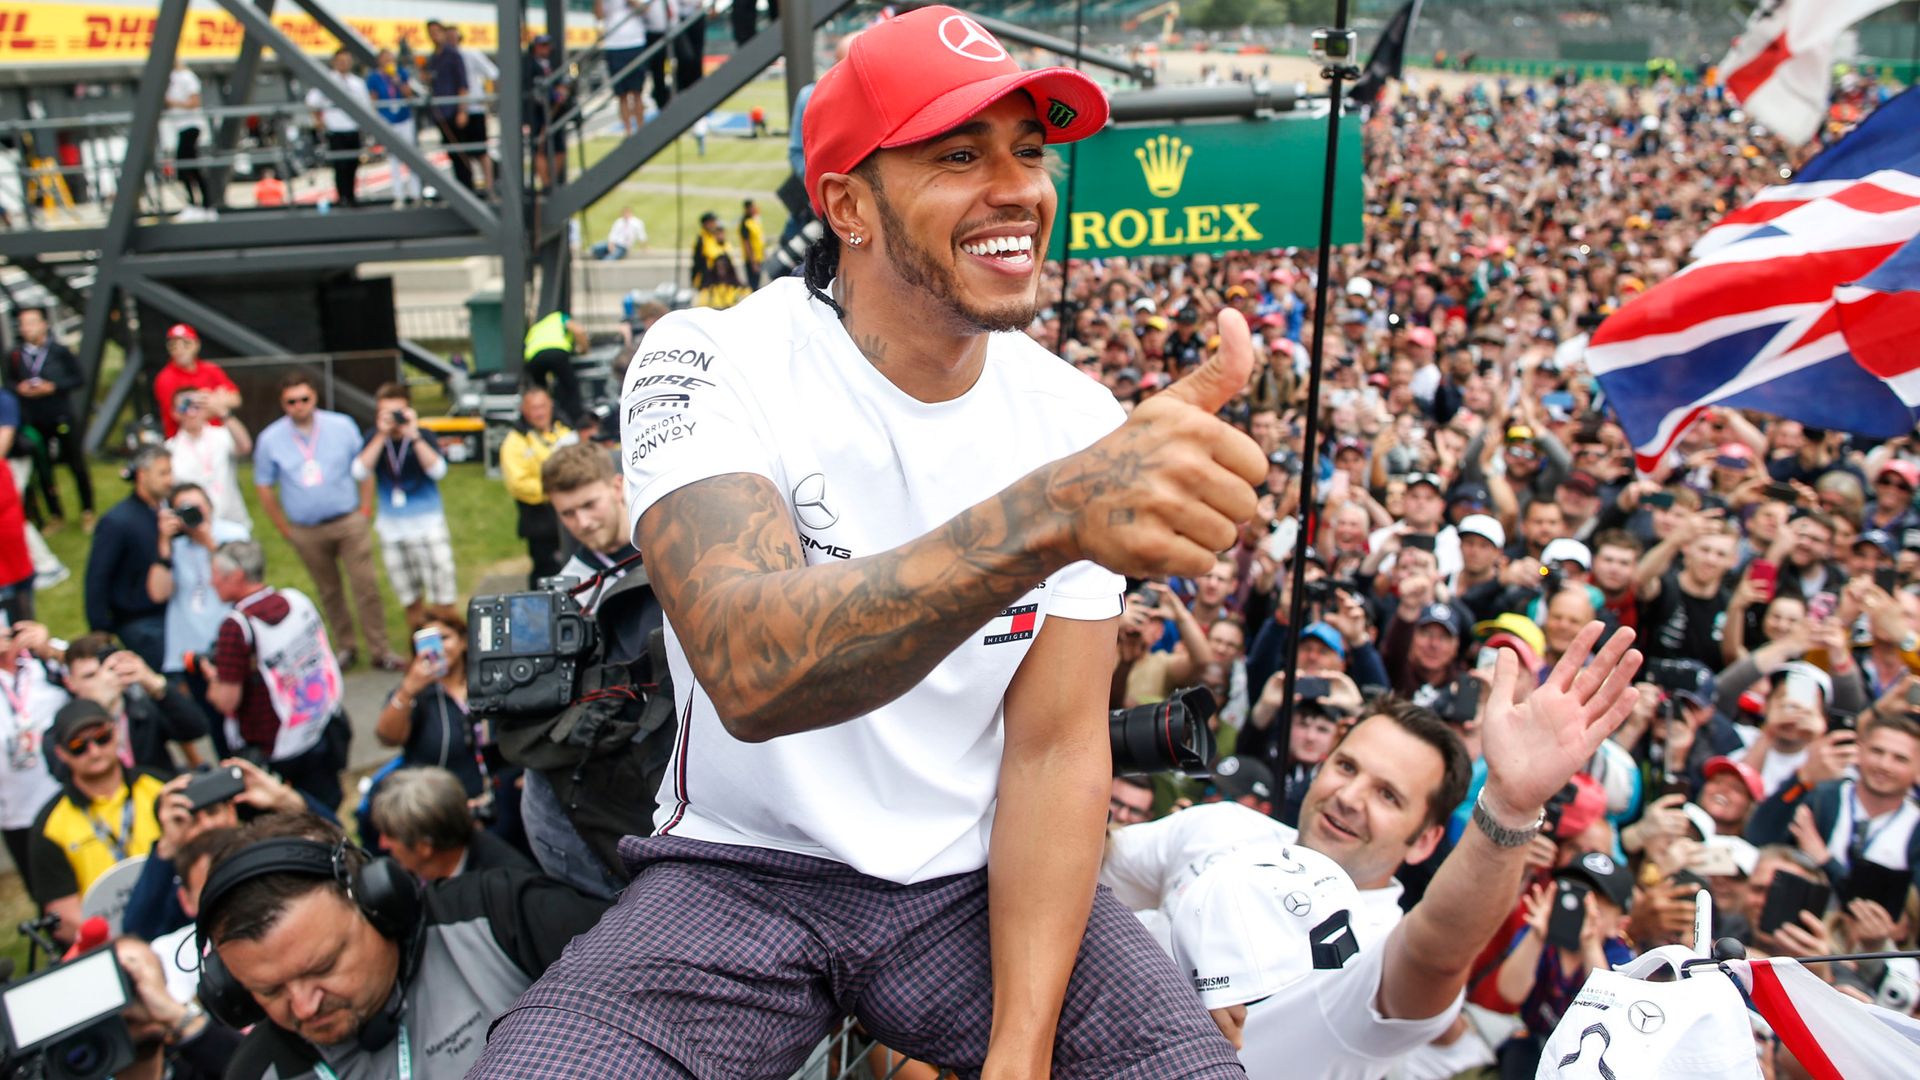 Silverstone given green light to welcome full crowd for British GP